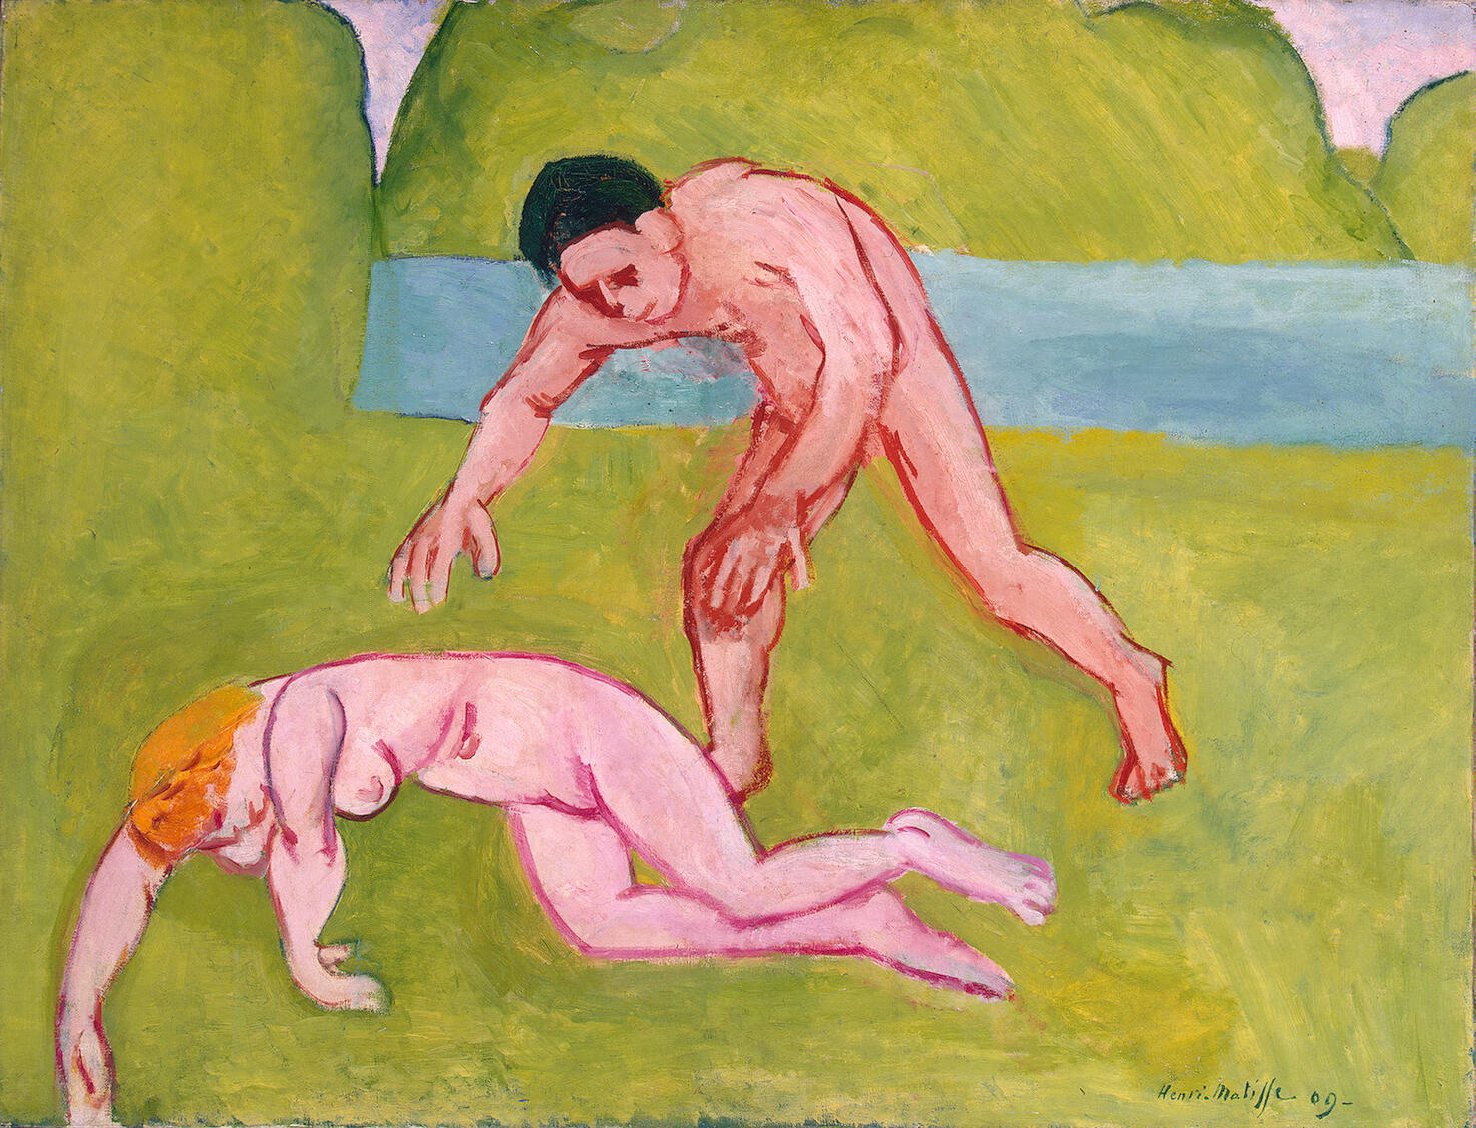 Nymph And Satyr by Henri Matisse, 1909